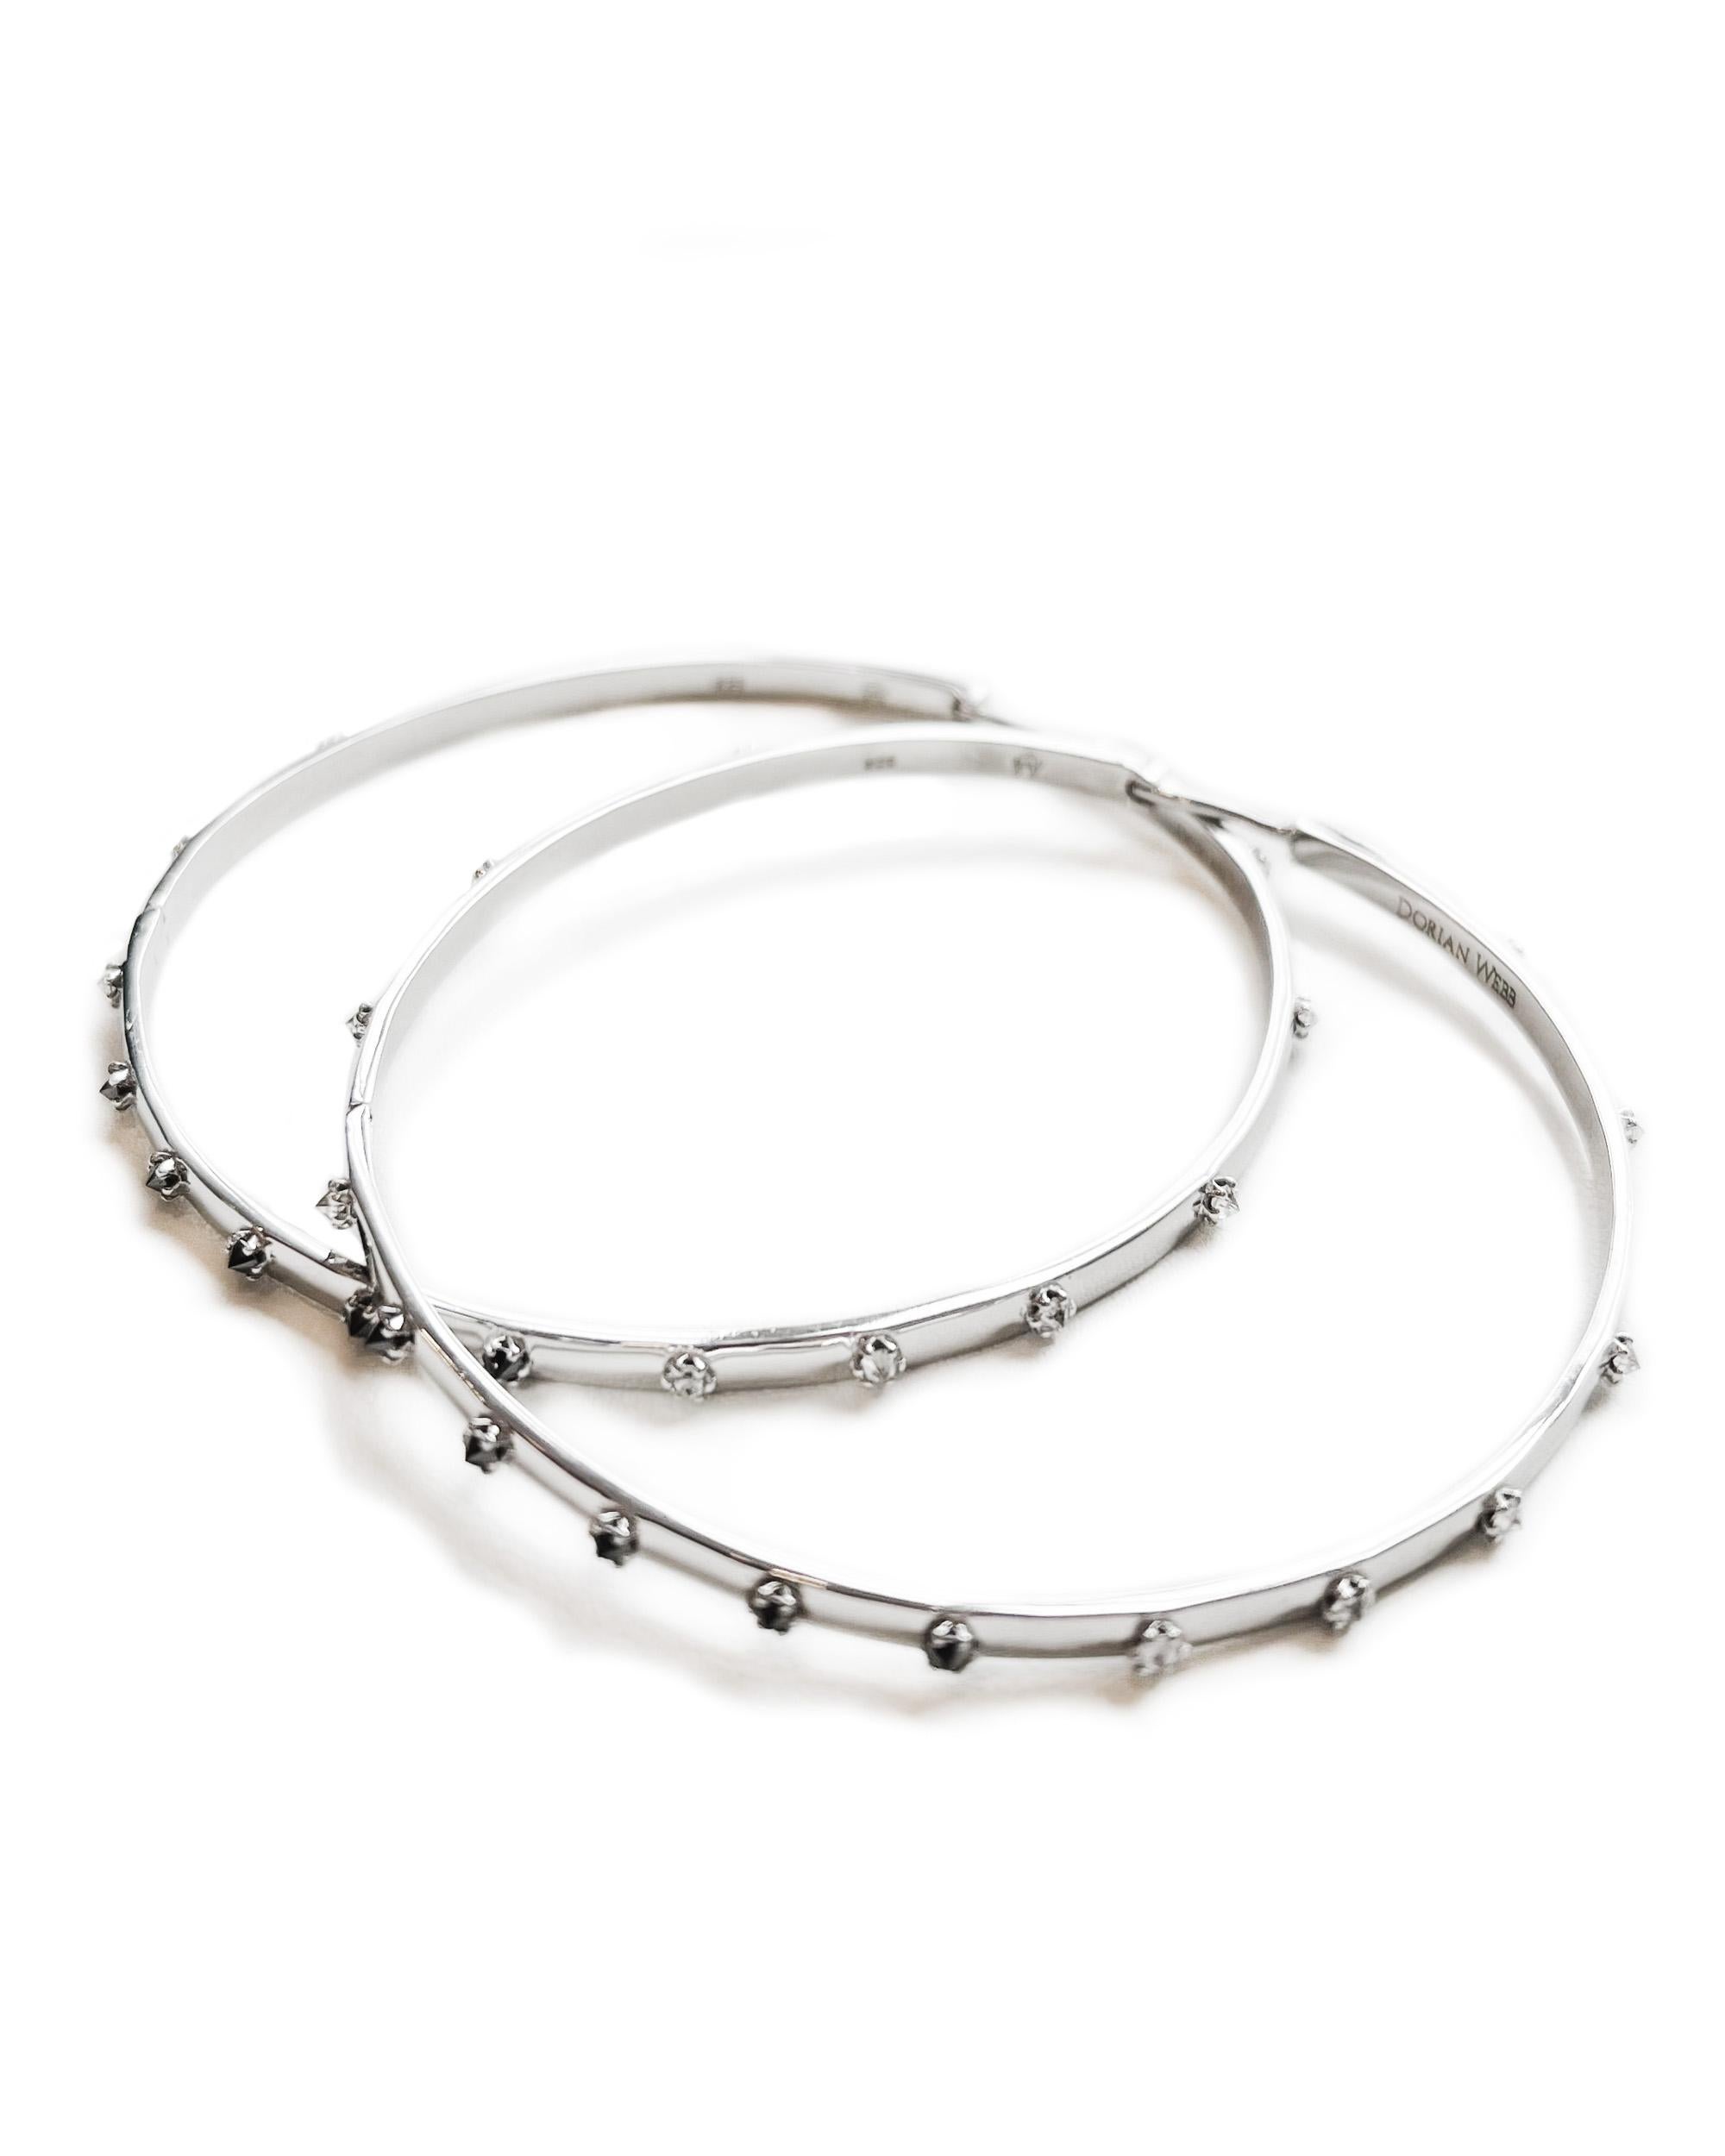 Intention: Savoring the Details

Design: An ombre' constellation of 2mm diamonds ranging from white to salt and pepper to black makes a welcome and subtle appearance in these streamlined hoops. Inverted in sterling silver settings, the usually